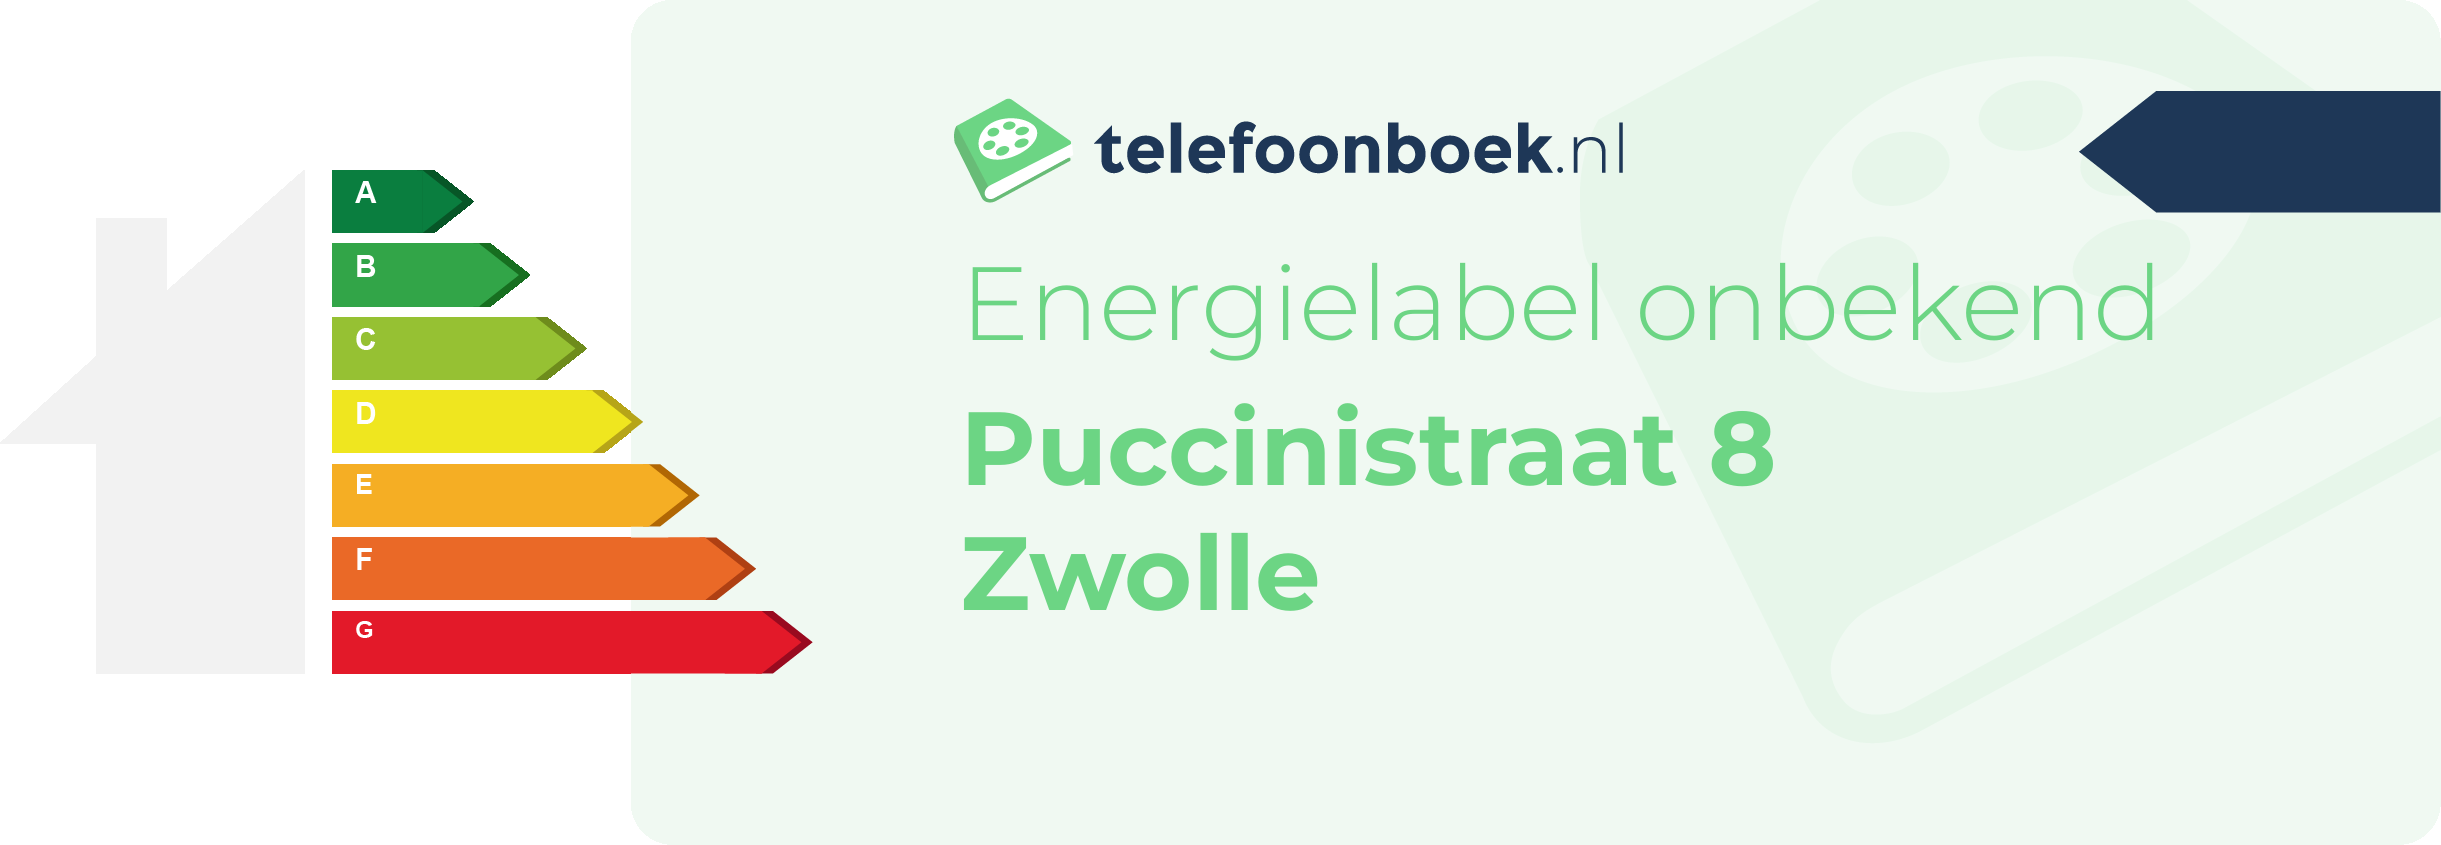 Energielabel Puccinistraat 8 Zwolle